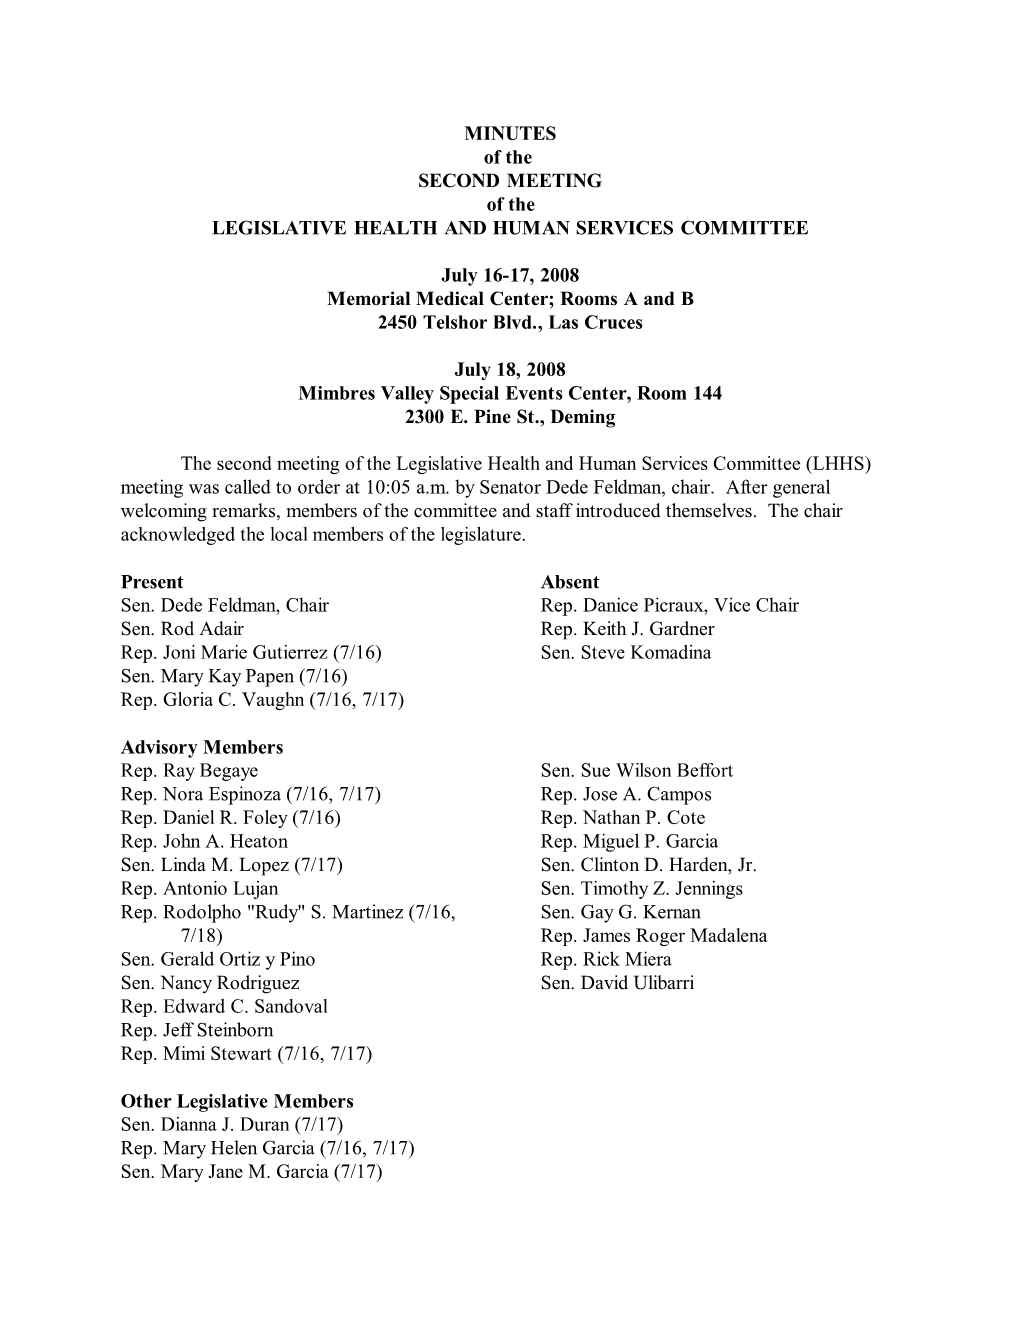 MINUTES of the SECOND MEETING of the LEGISLATIVE HEALTH and HUMAN SERVICES COMMITTEE